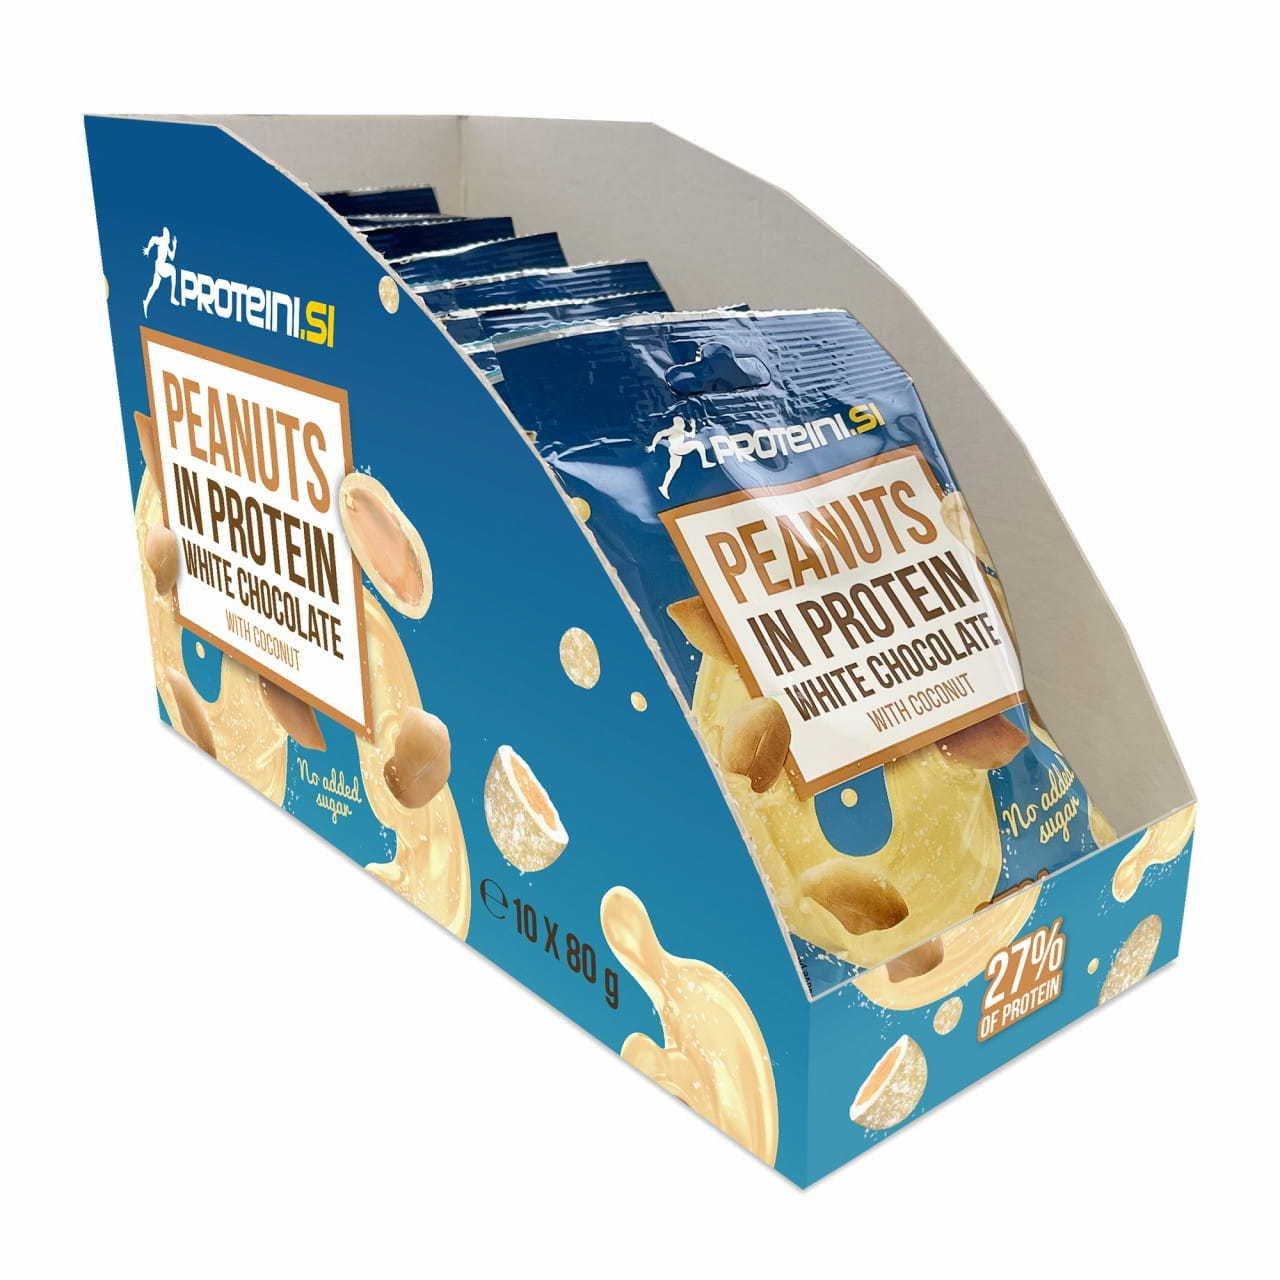 Image of proteini Peanuts In Protein White Chocolate 80g - 80G